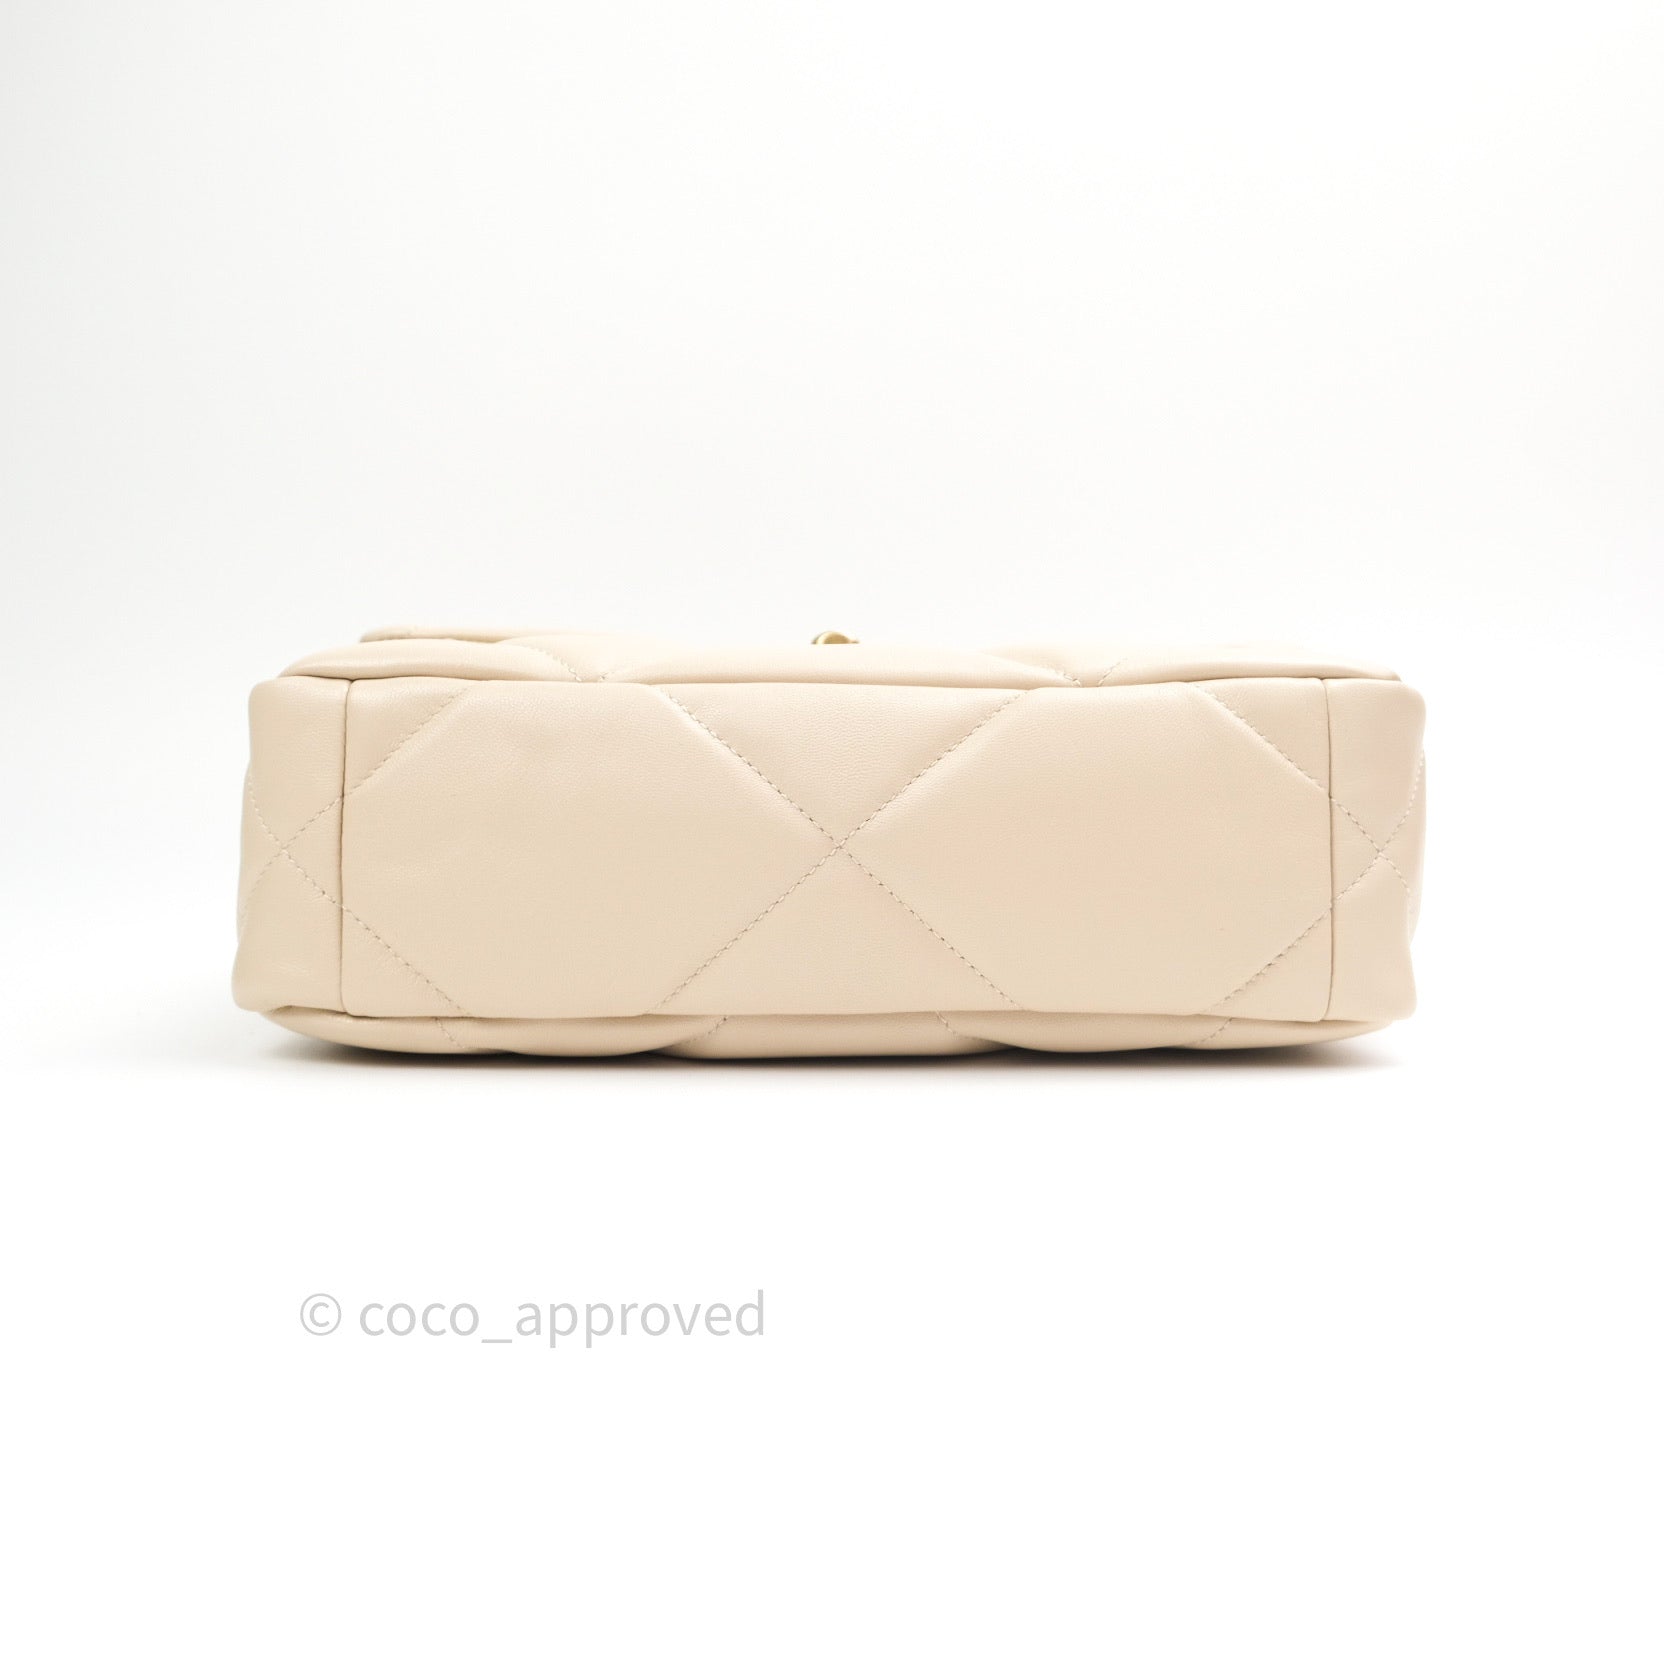 Chanel 19 Small Beige Goatskin Mixed Hardware – Coco Approved Studio